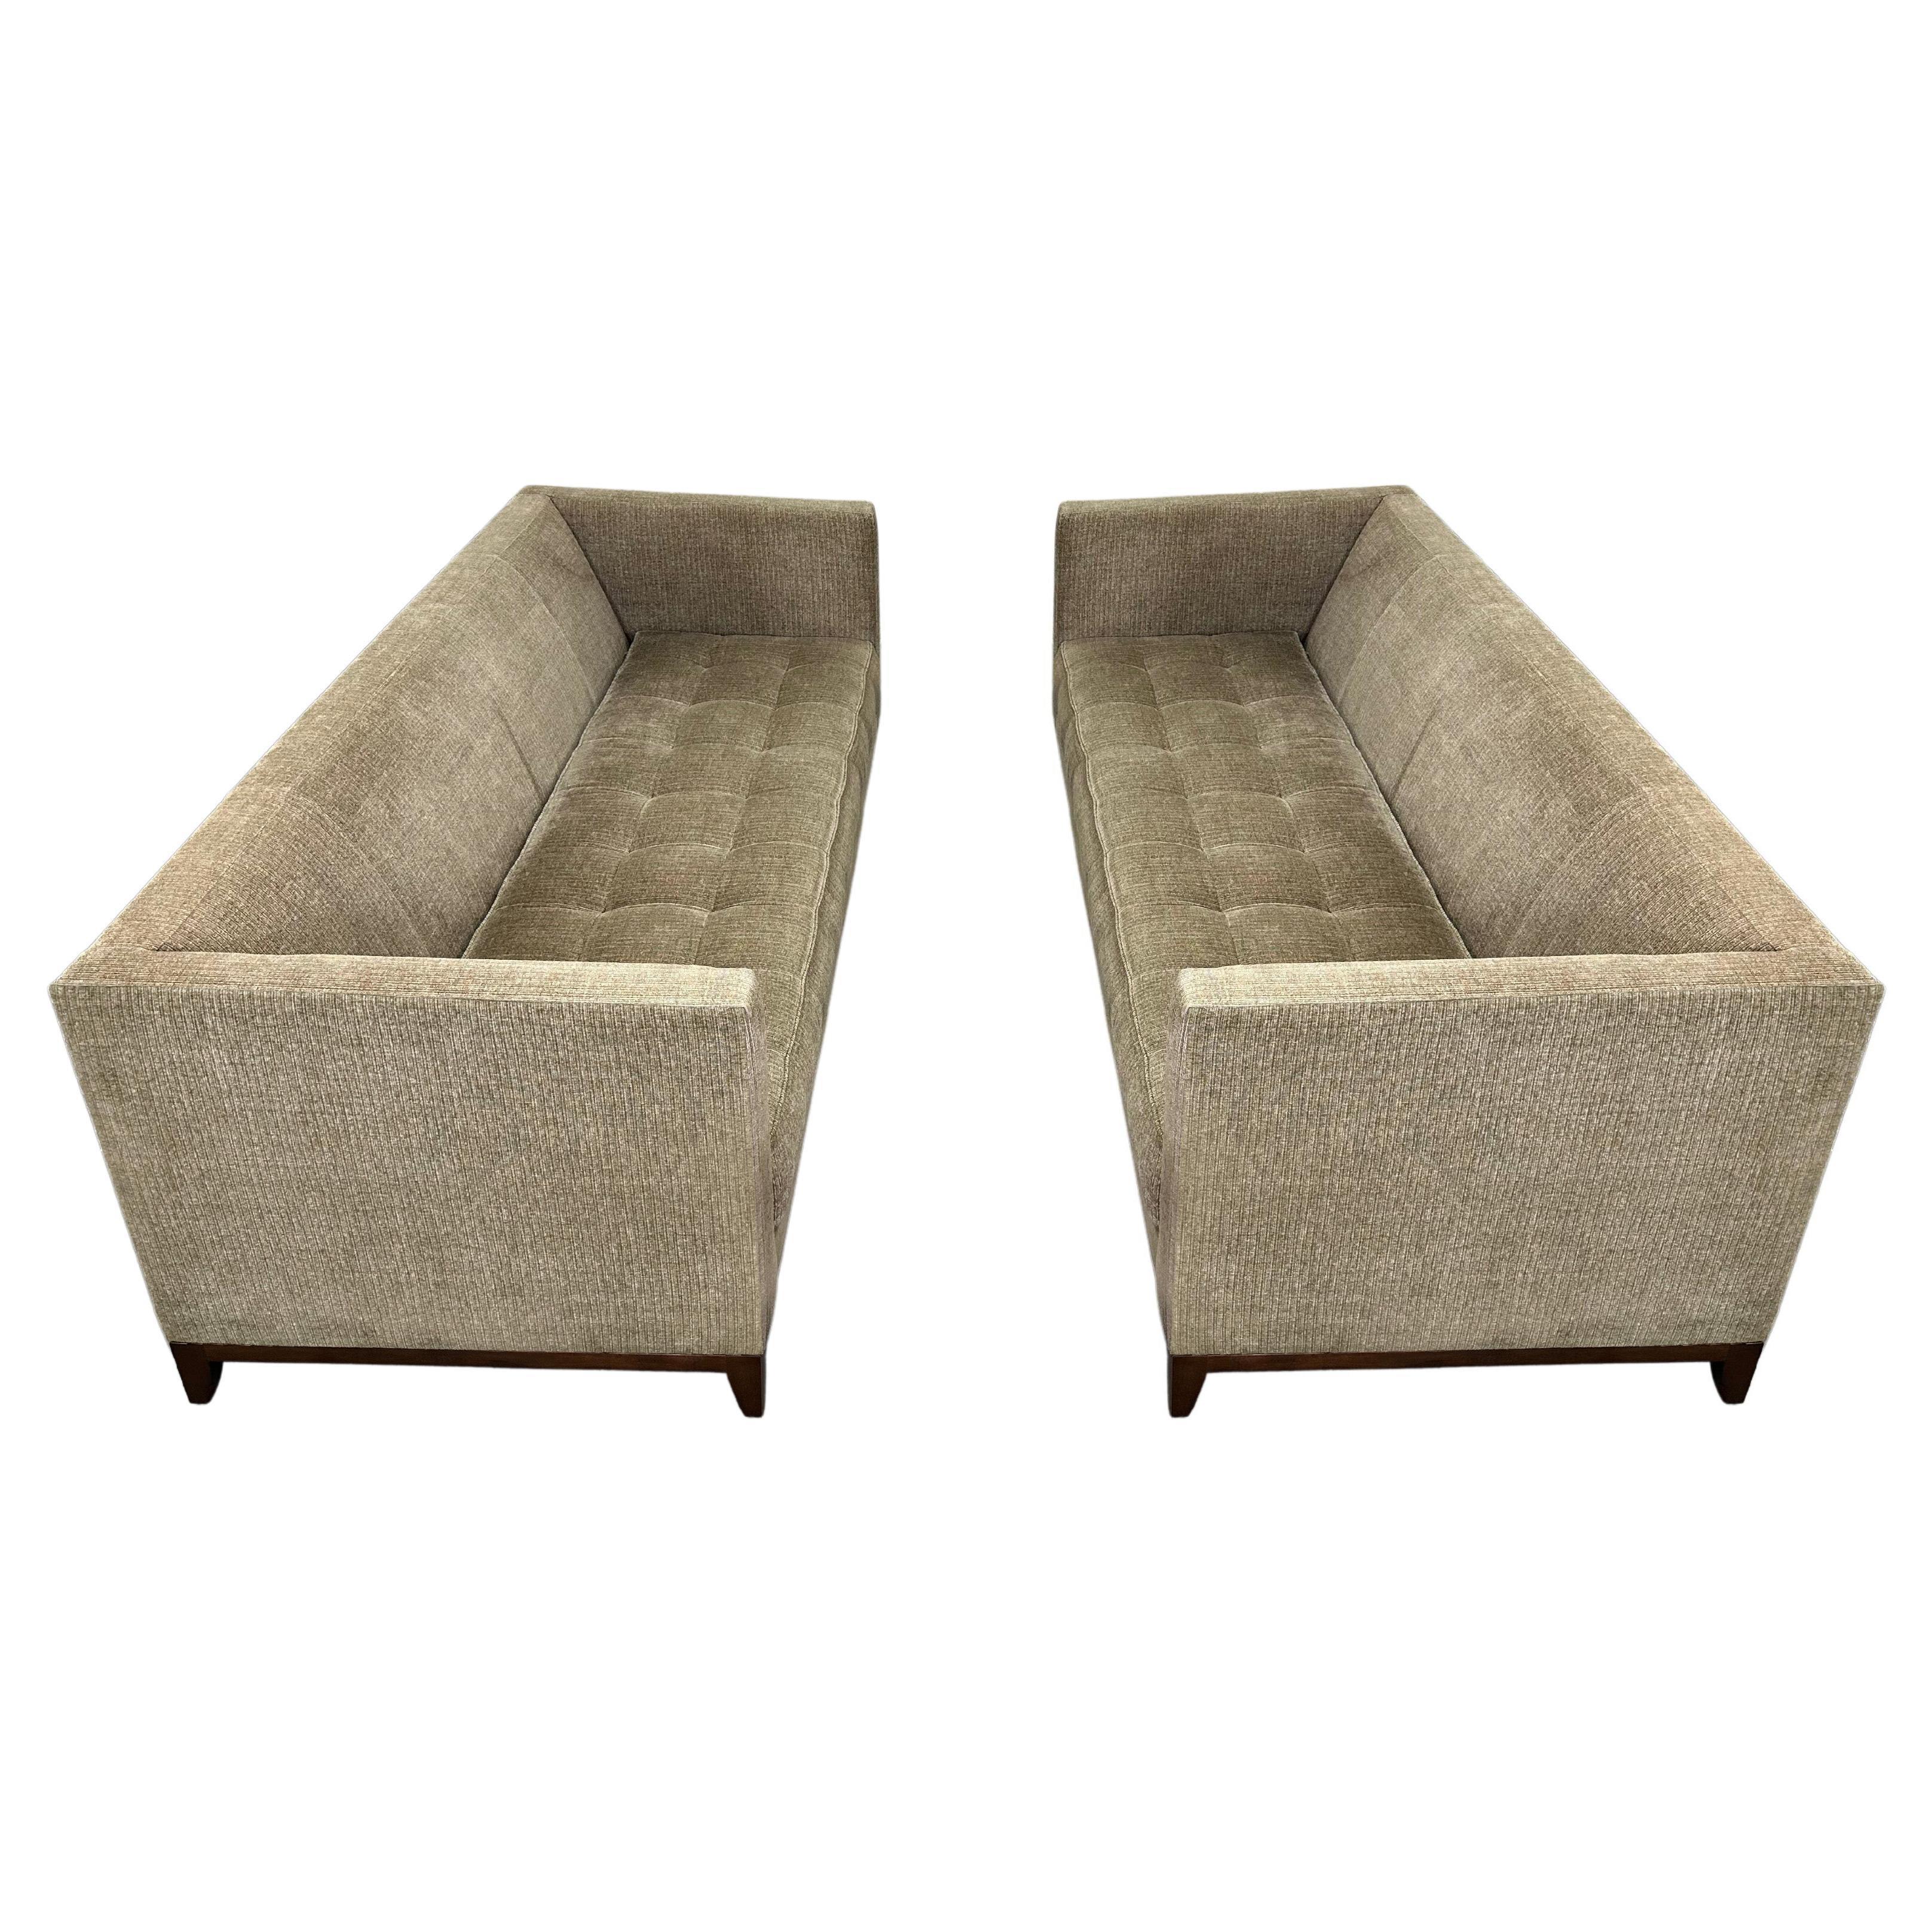 A modern and timeless pair of matching 3-seat sofas in high-chatoyancy olive gold chenille by Interior Crafts, Inc. USA, 2000s.

Extremely well crafted. Extremely comfortable. Add pillows to create your ultimate cozy spot to curl up and watch a